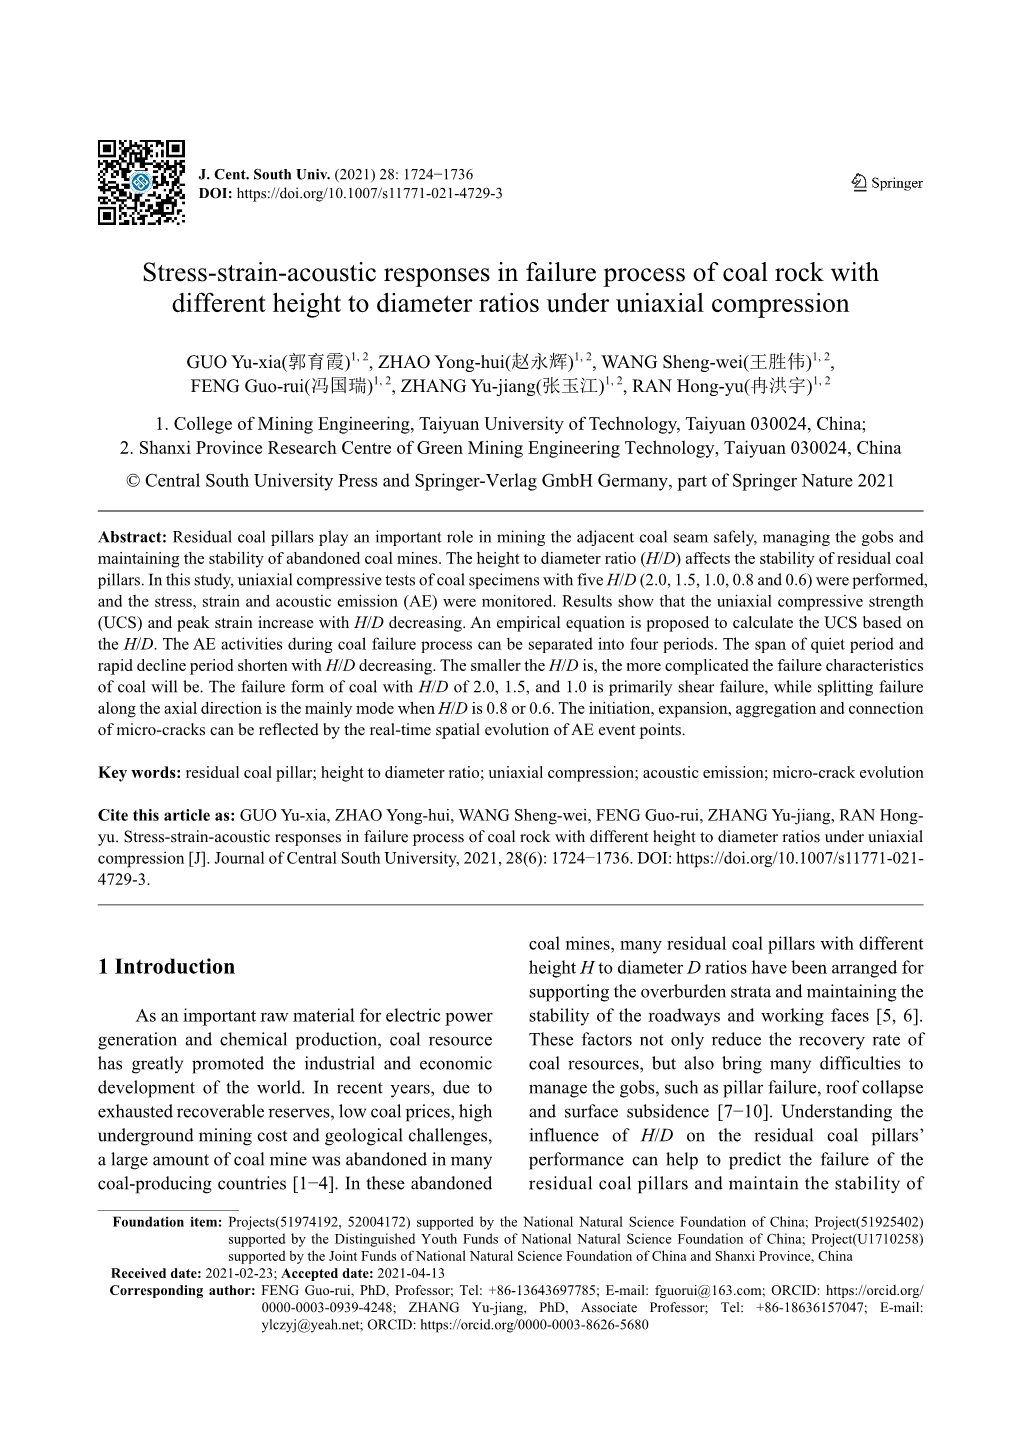 Stress-Strain-Acoustic Responses in Failure Process of Coal Rock with Different Height to Diameter Ratios Under Uniaxial Compression